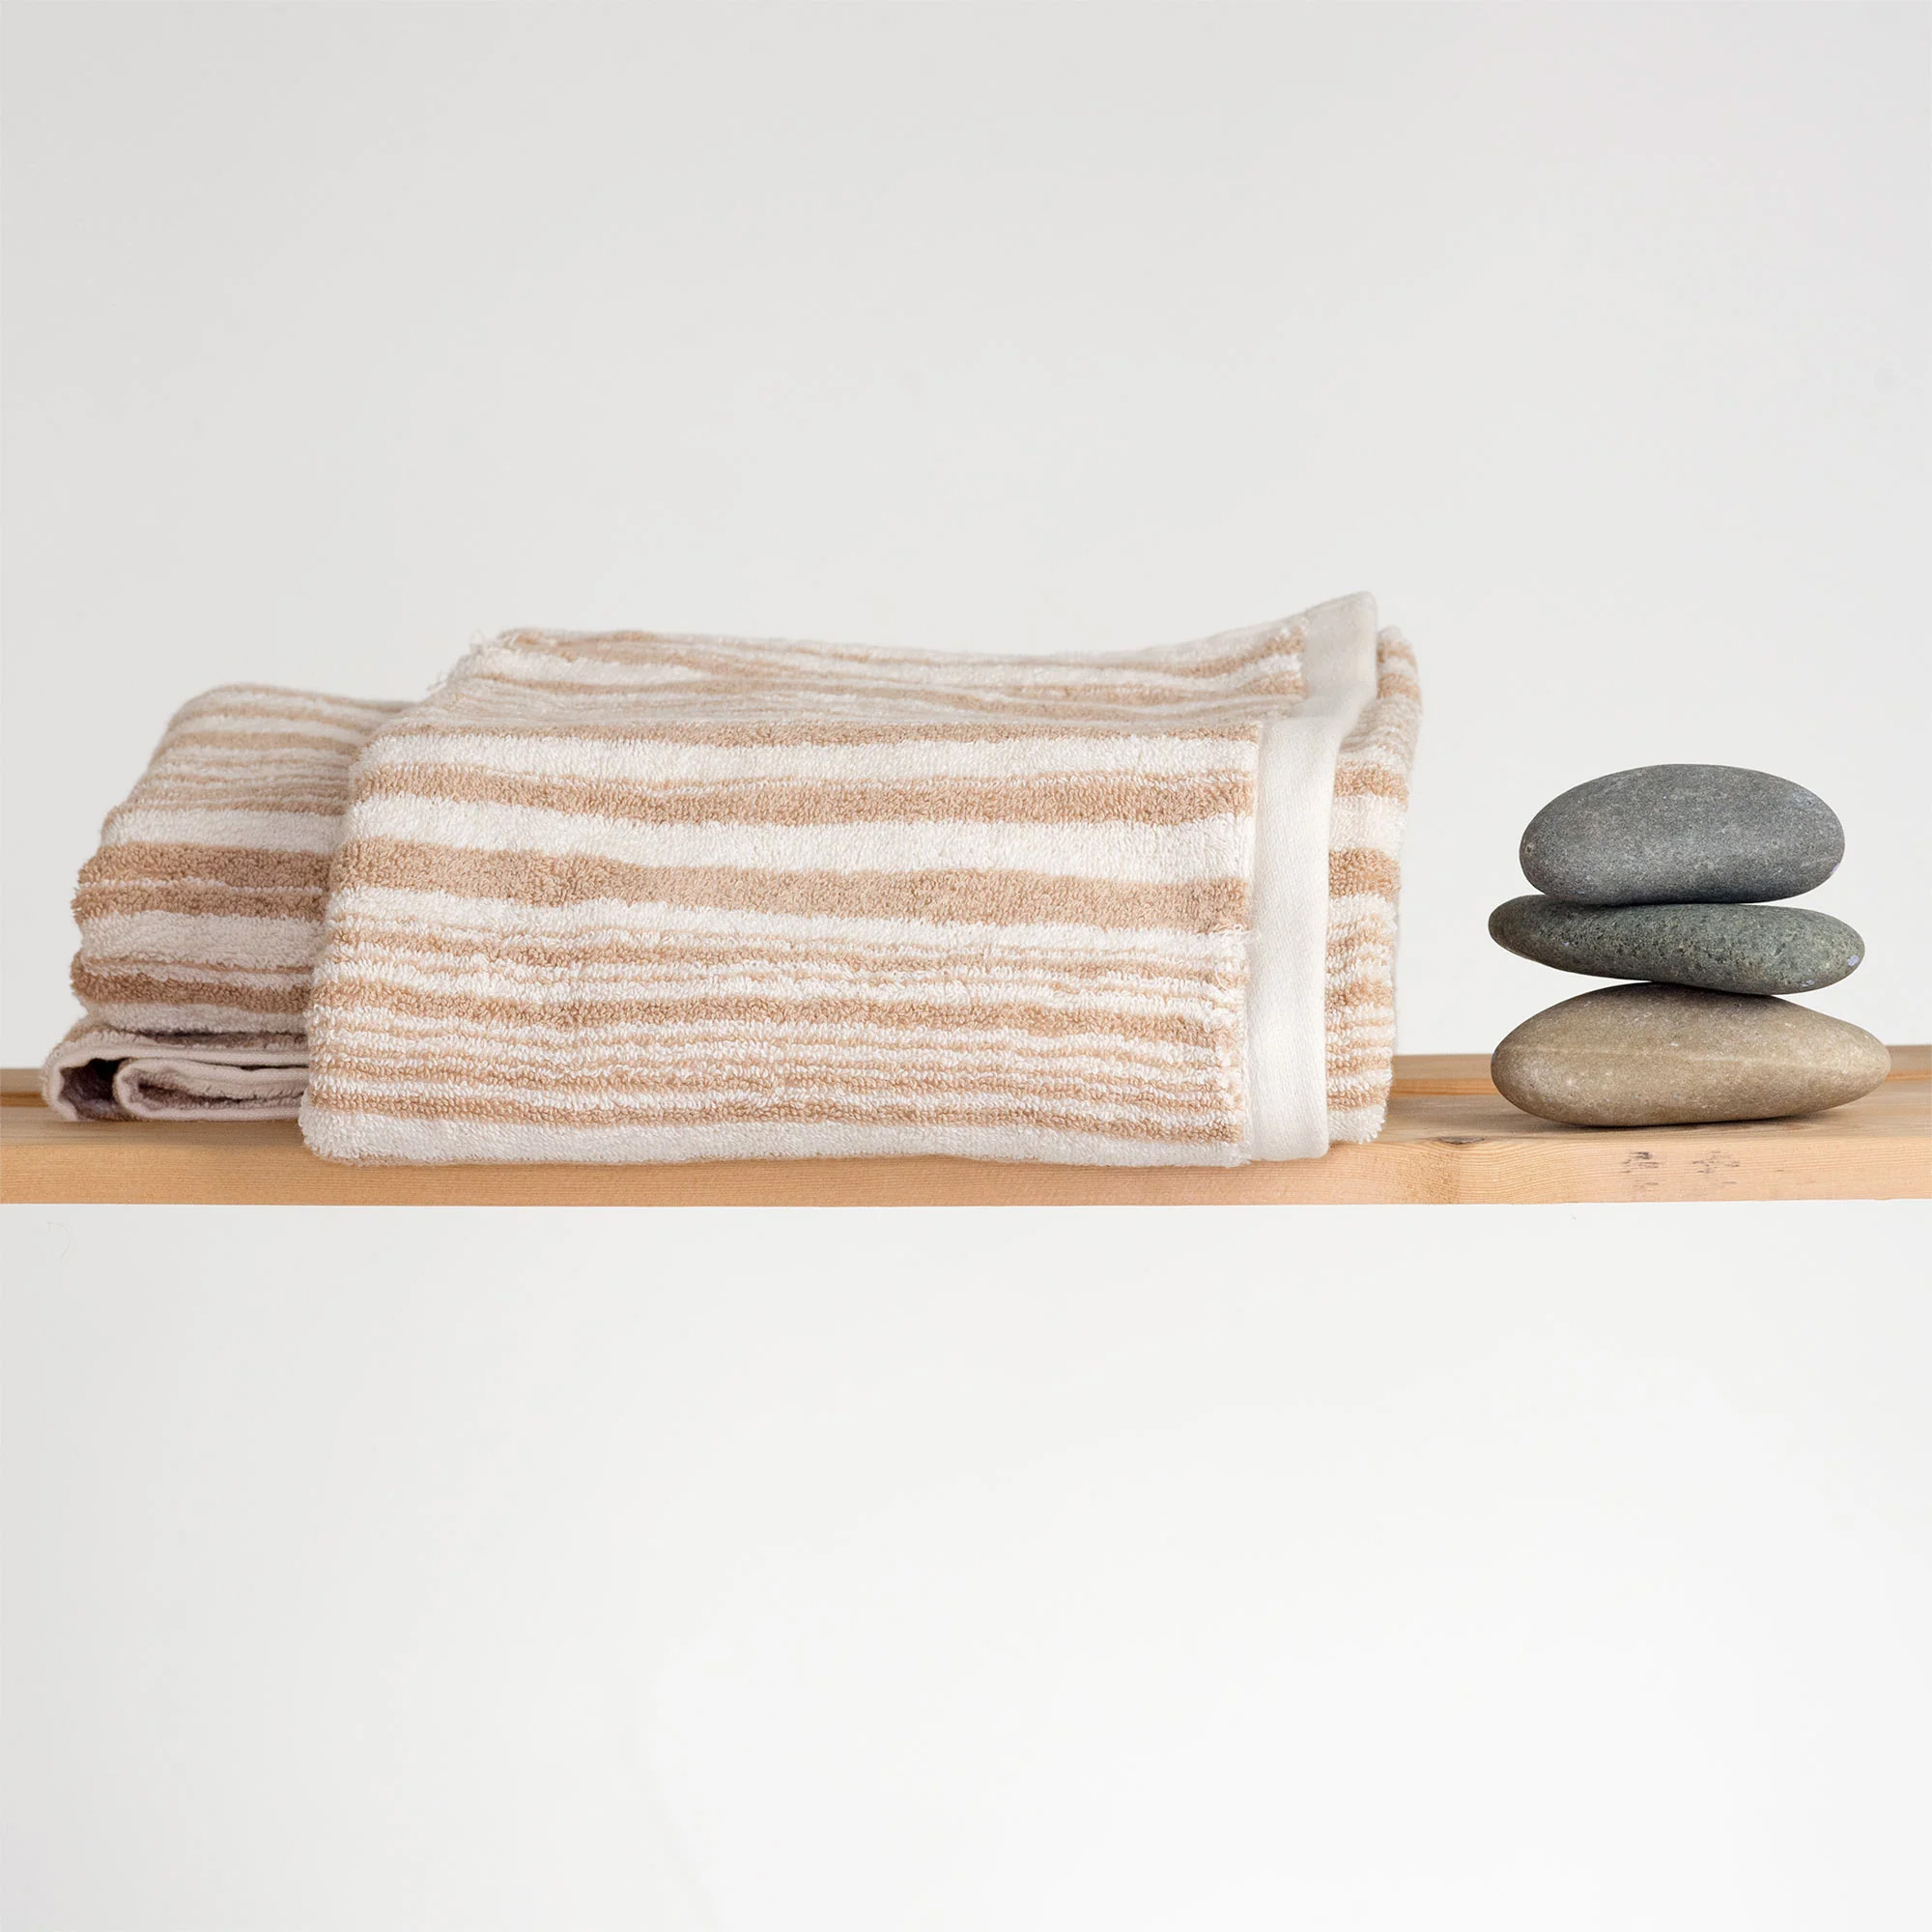 Rawganique towels on rack with rock